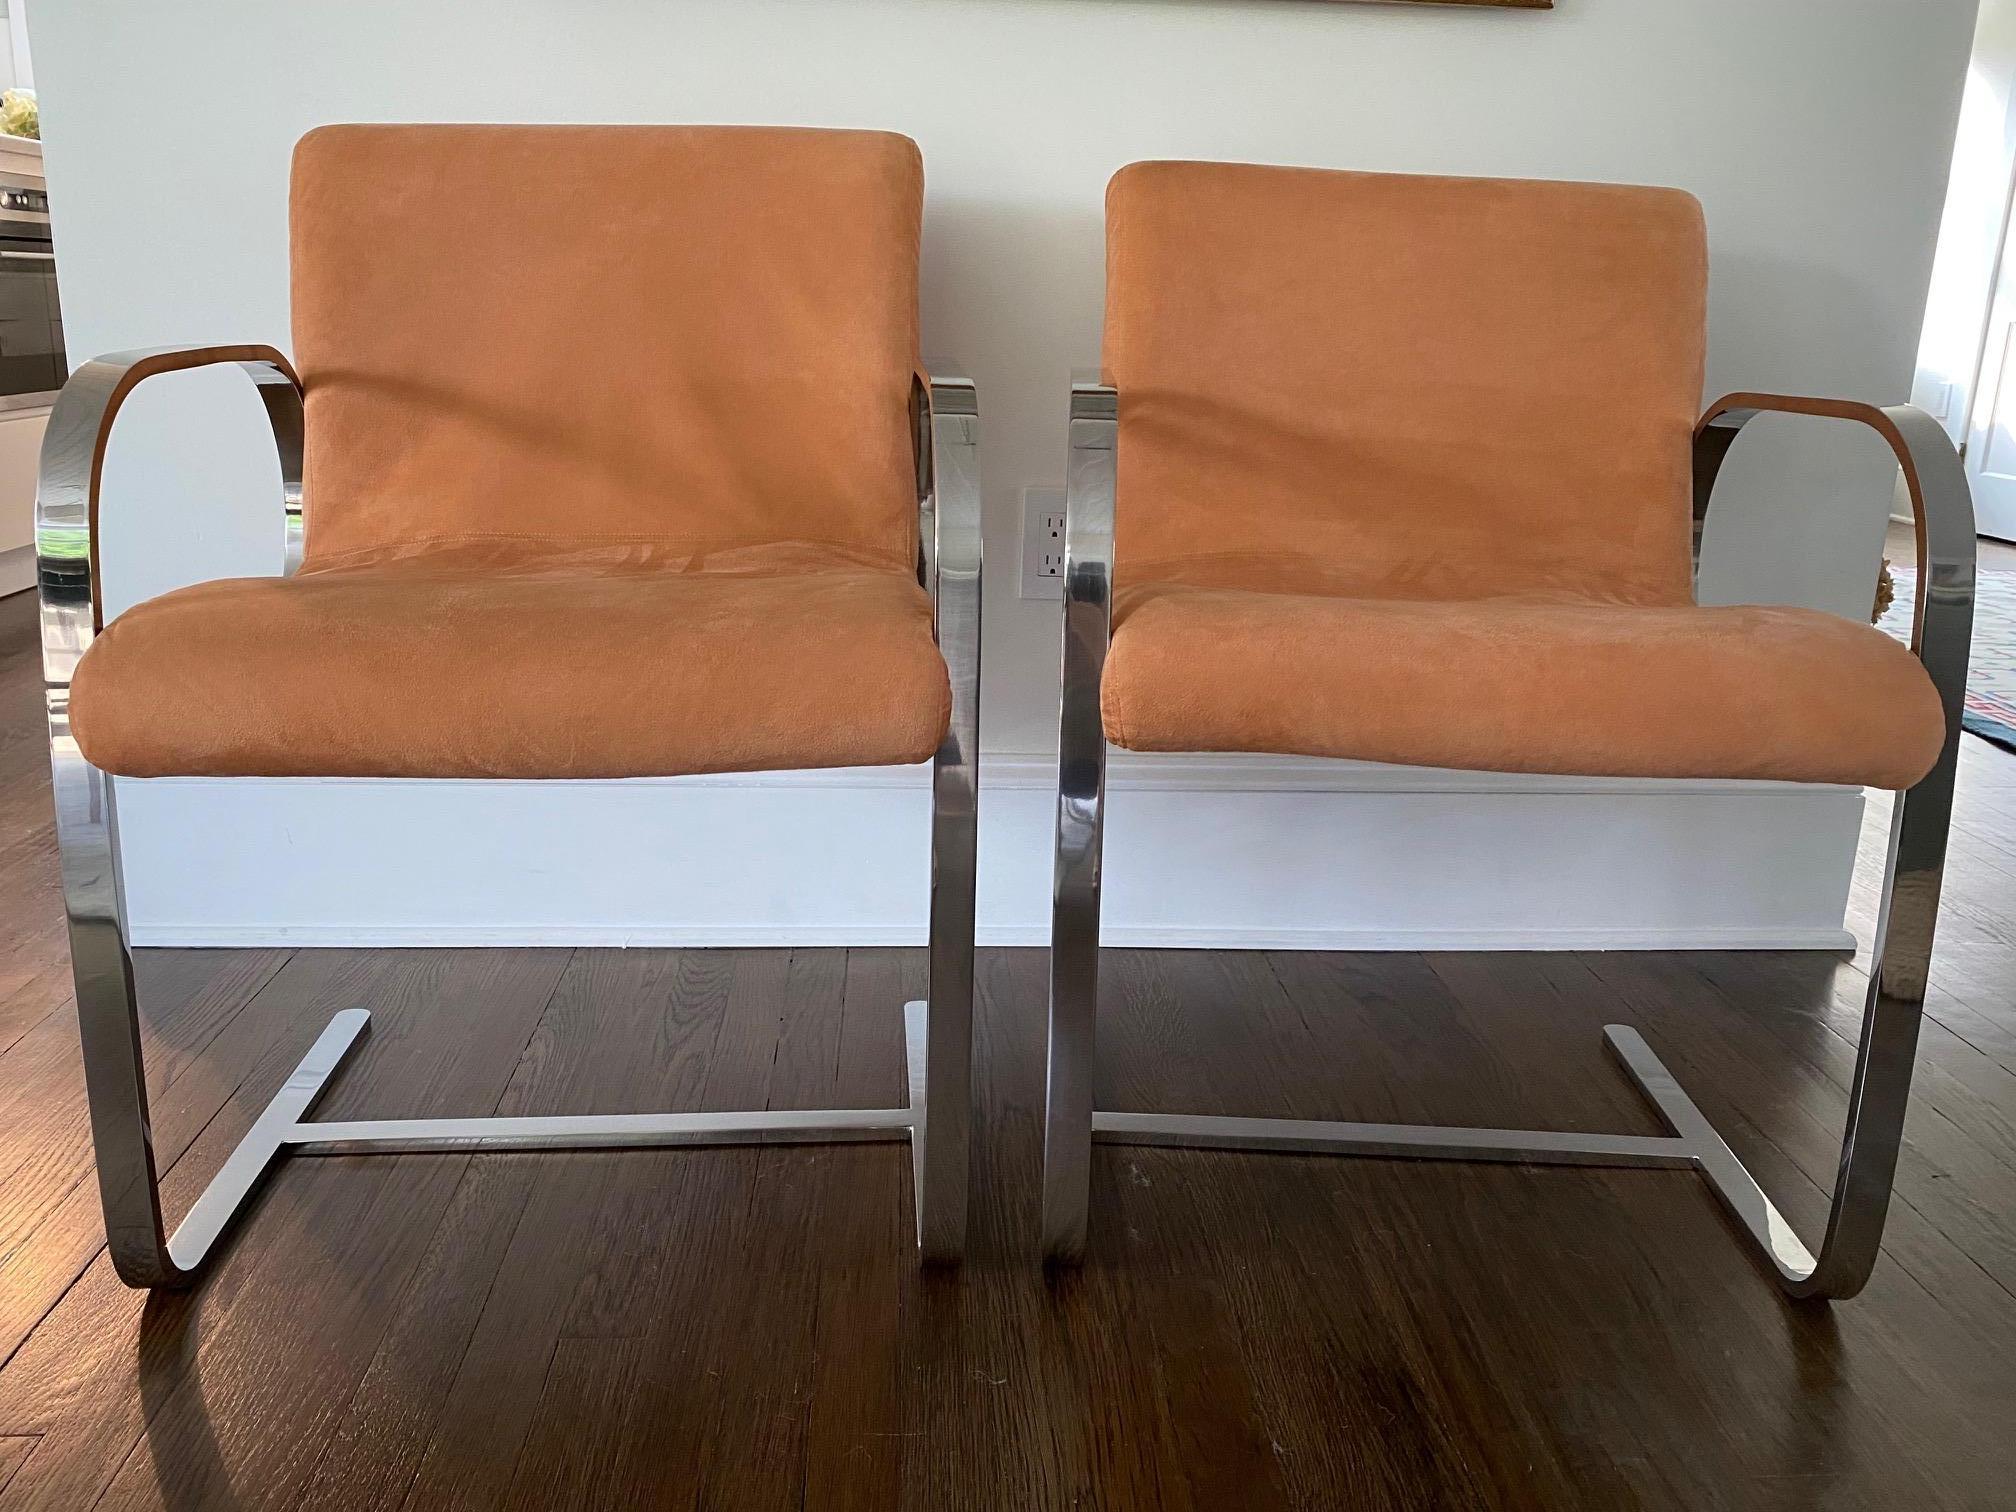 Pair of Mid Century Modern Milo Baughman Style Chrome & Ultrasuede Club Chairs For Sale 8